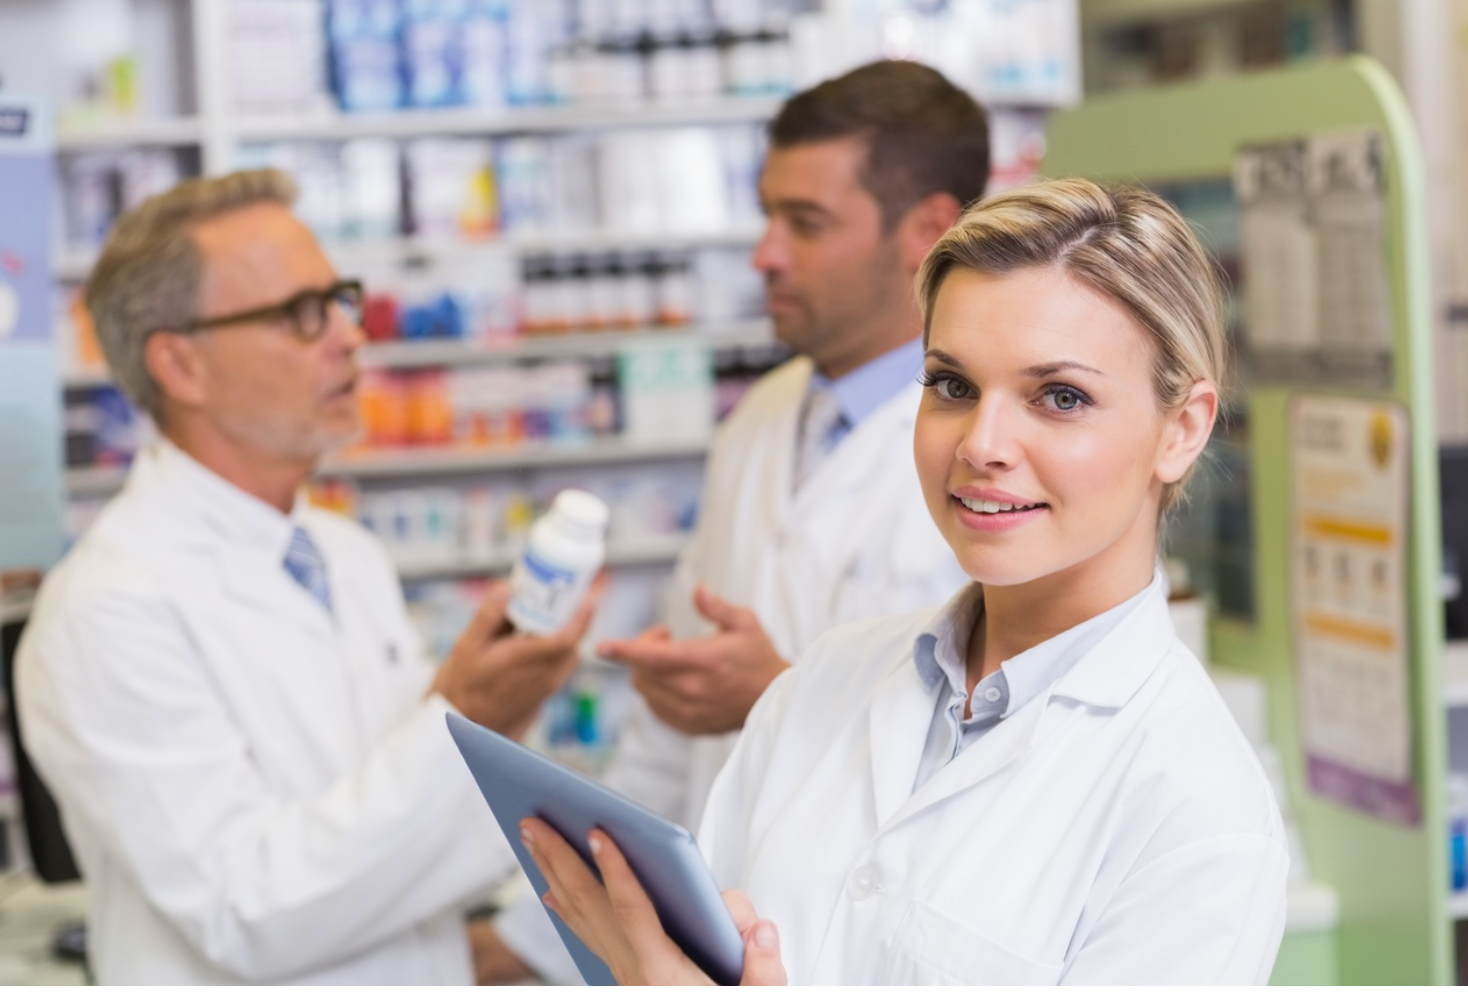 Knowing Personal Value is Key for Pharmacy Technicians to Advance Their Career